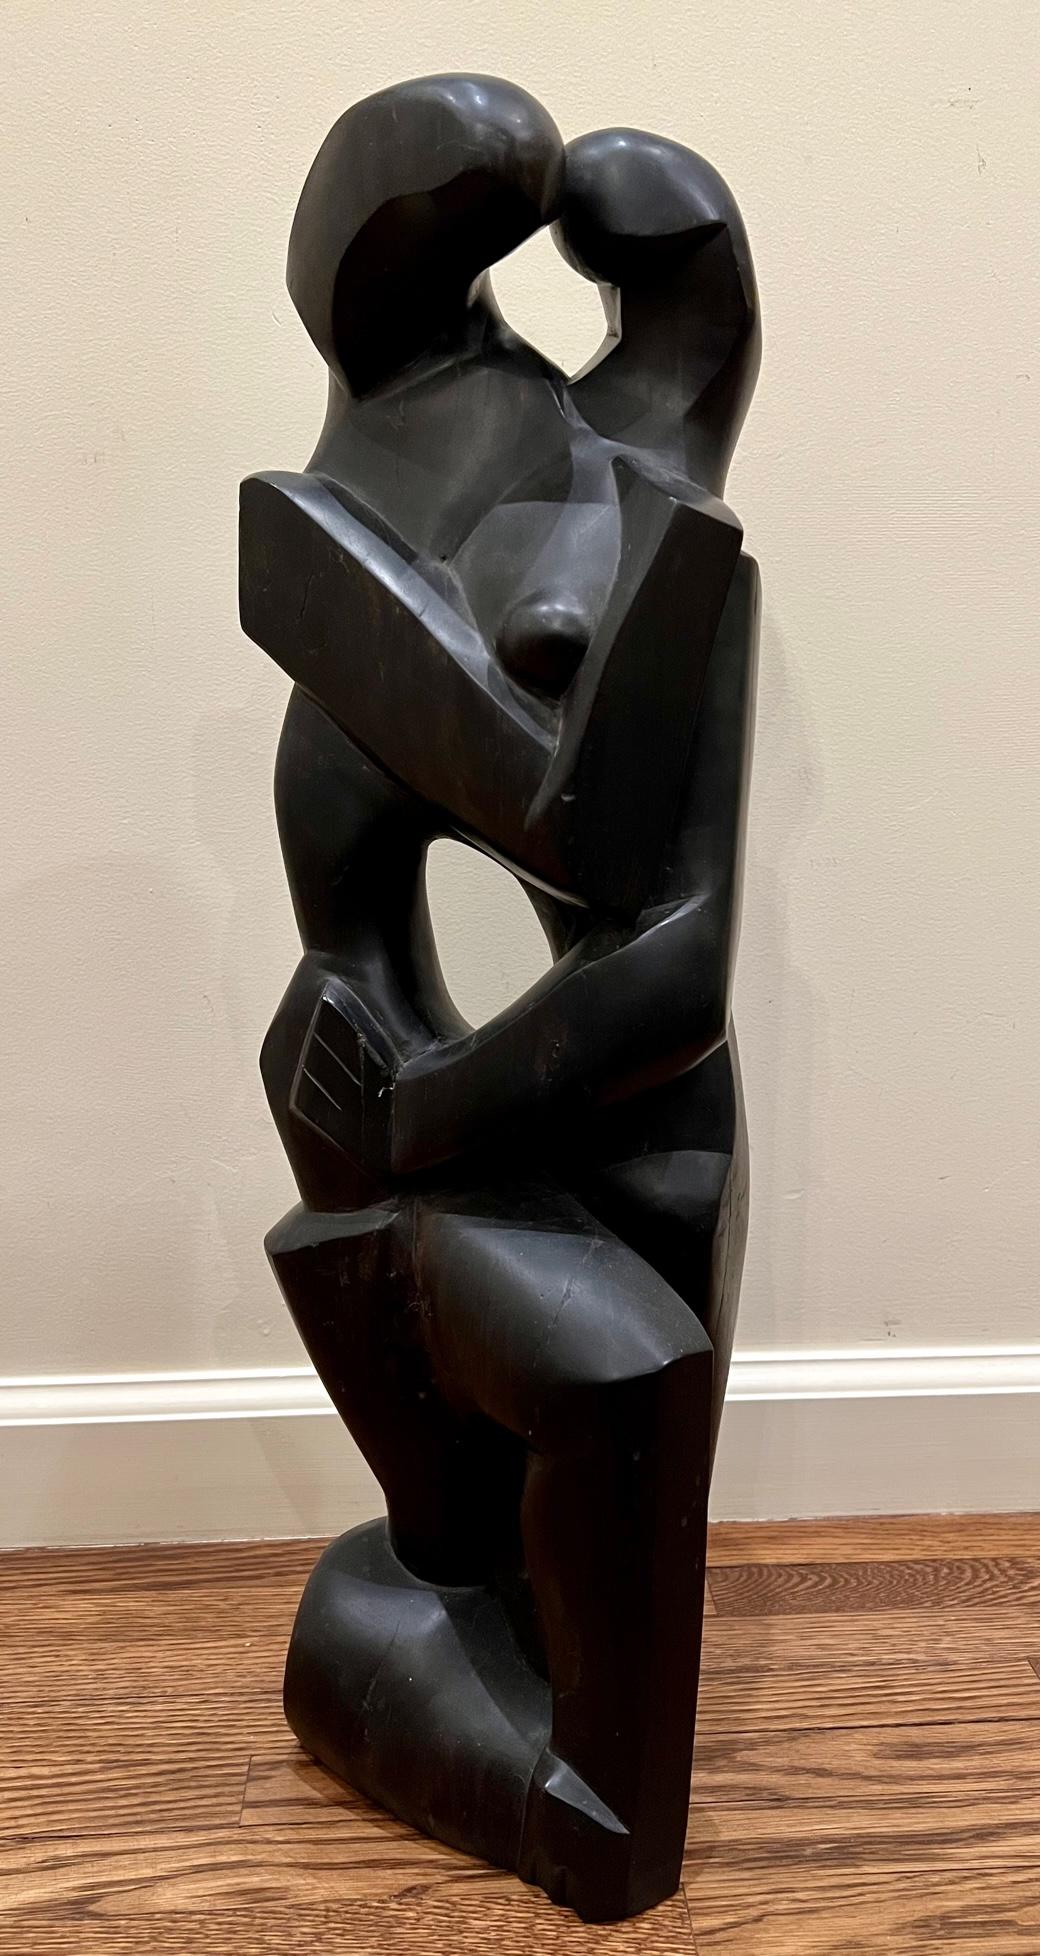 Two Figures - Sculpture by Robert Chester Thomas